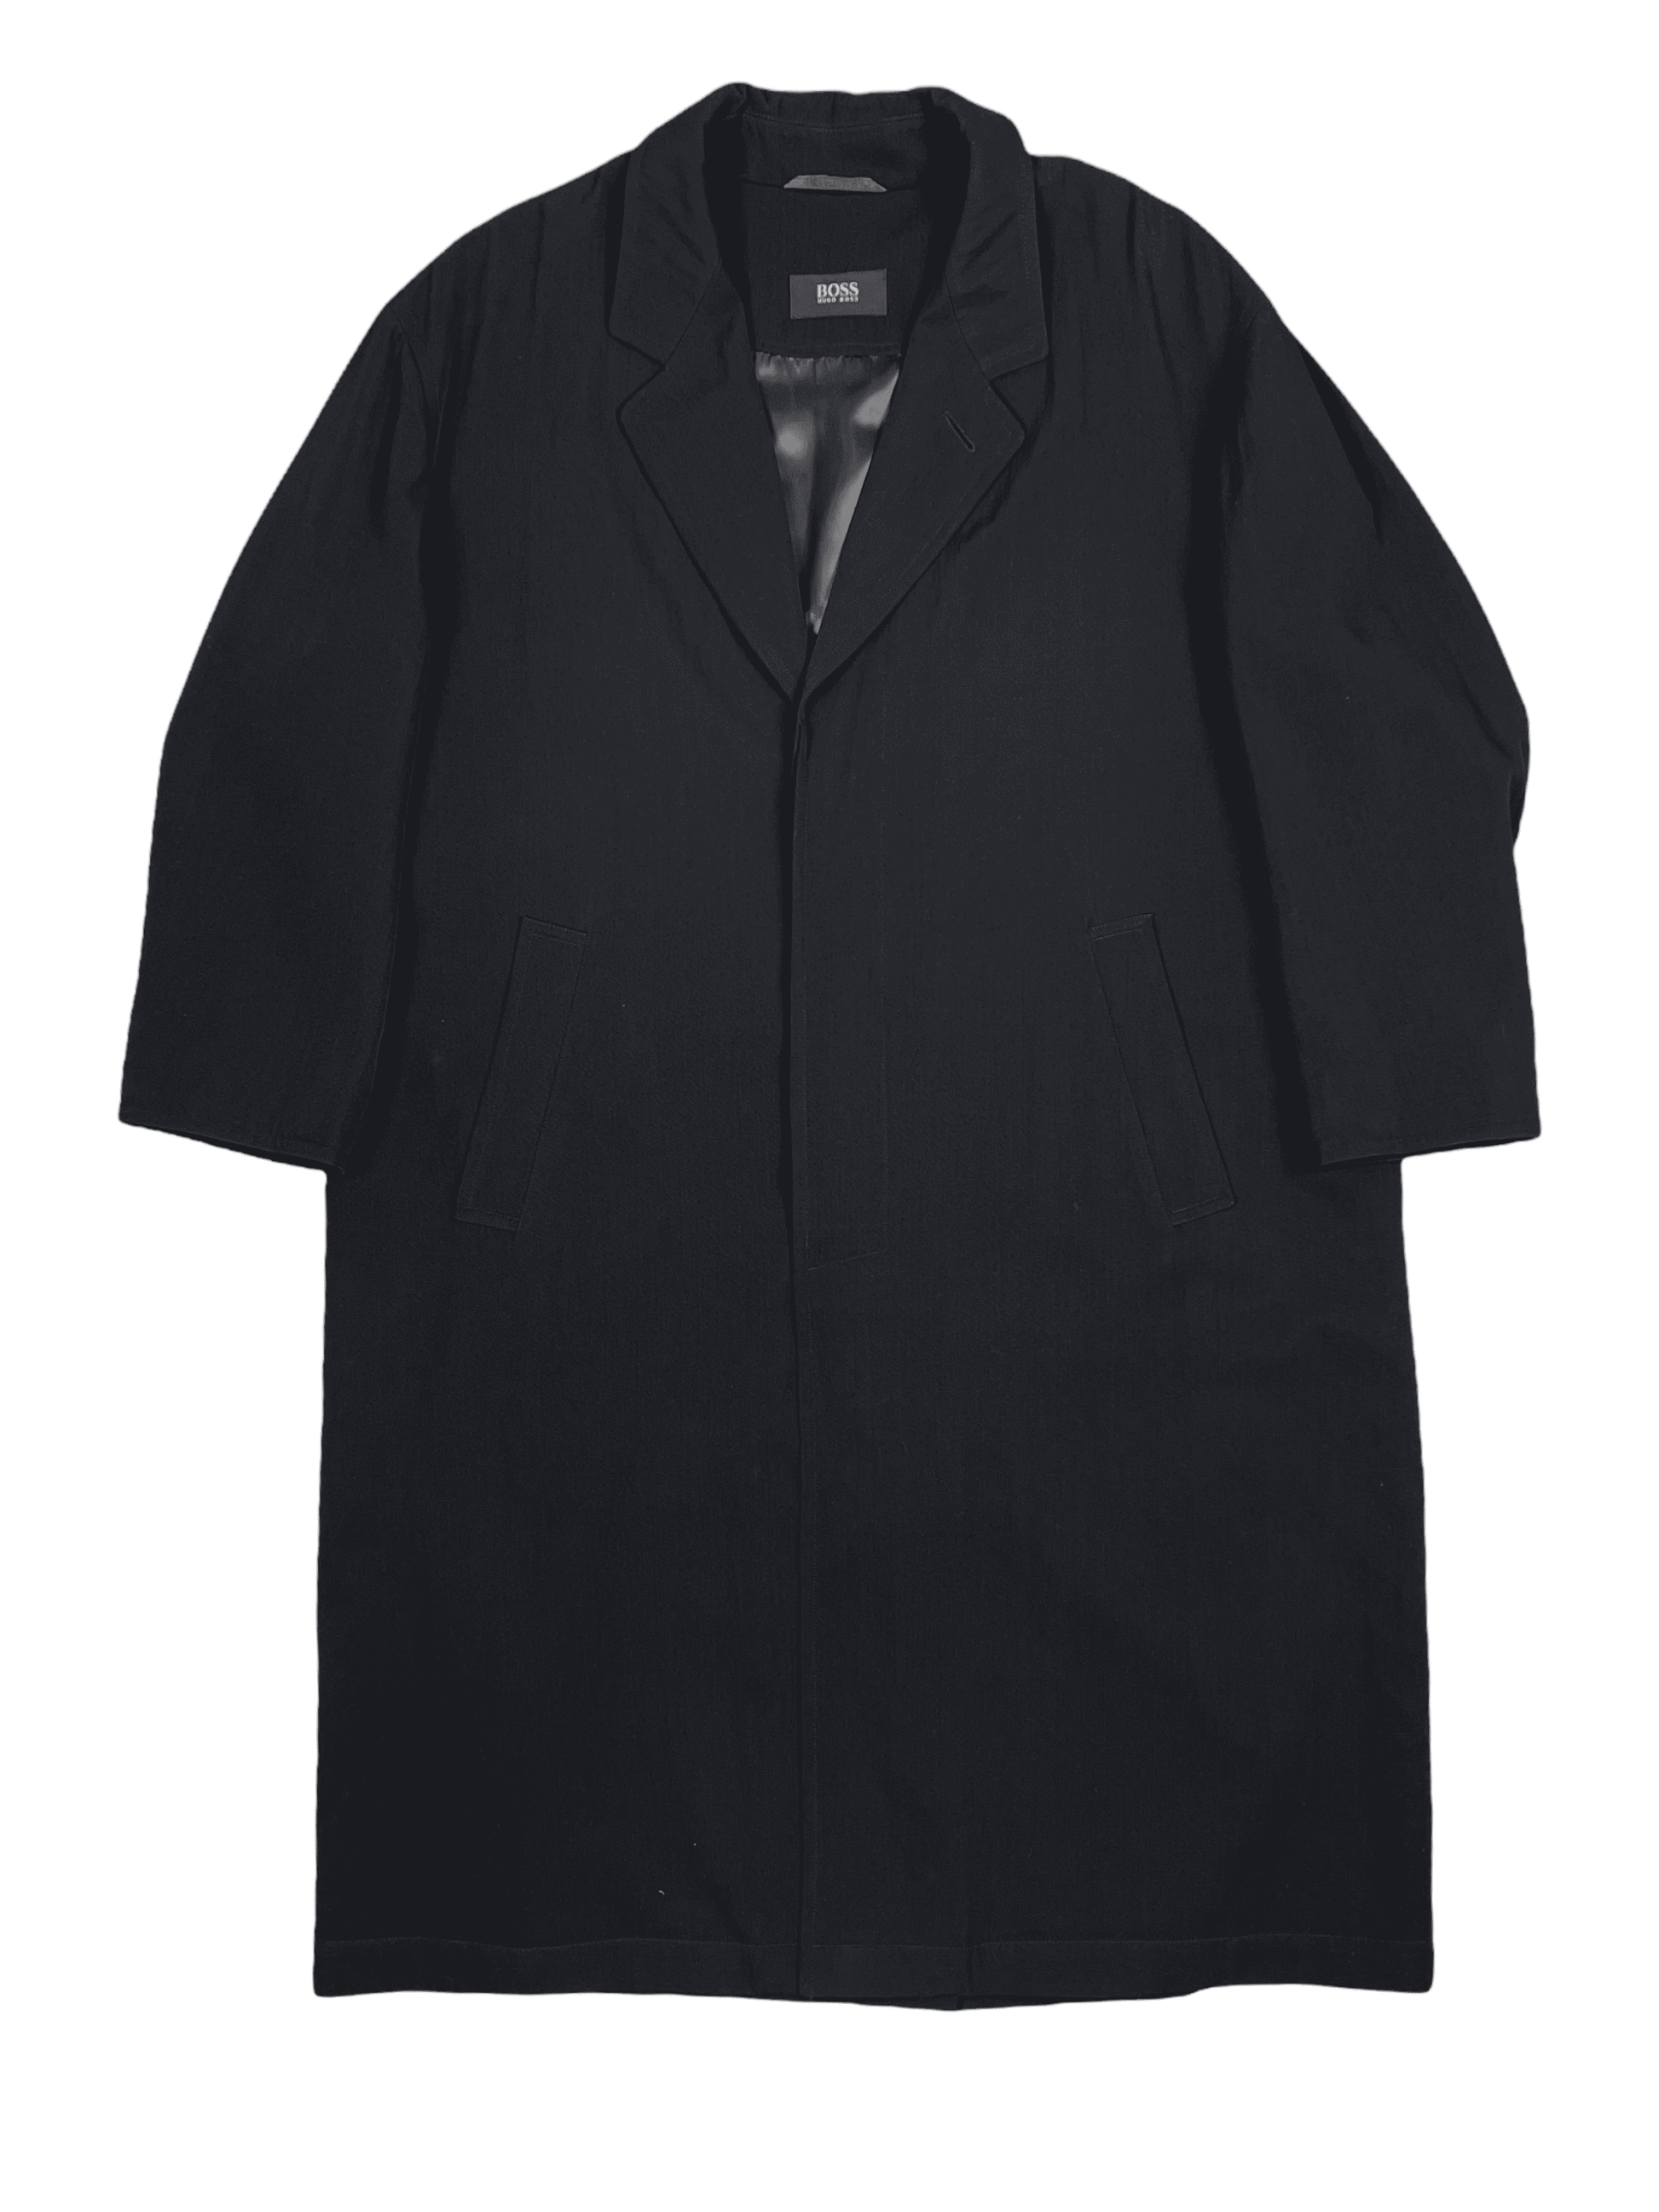 Hugo Boss Black Wool Blend Top Coat – 54R / XXL - Genuine Design Luxury Consignment for Men. New & Pre-Owned Clothing, Shoes, & Accessories. Calgary, Canada